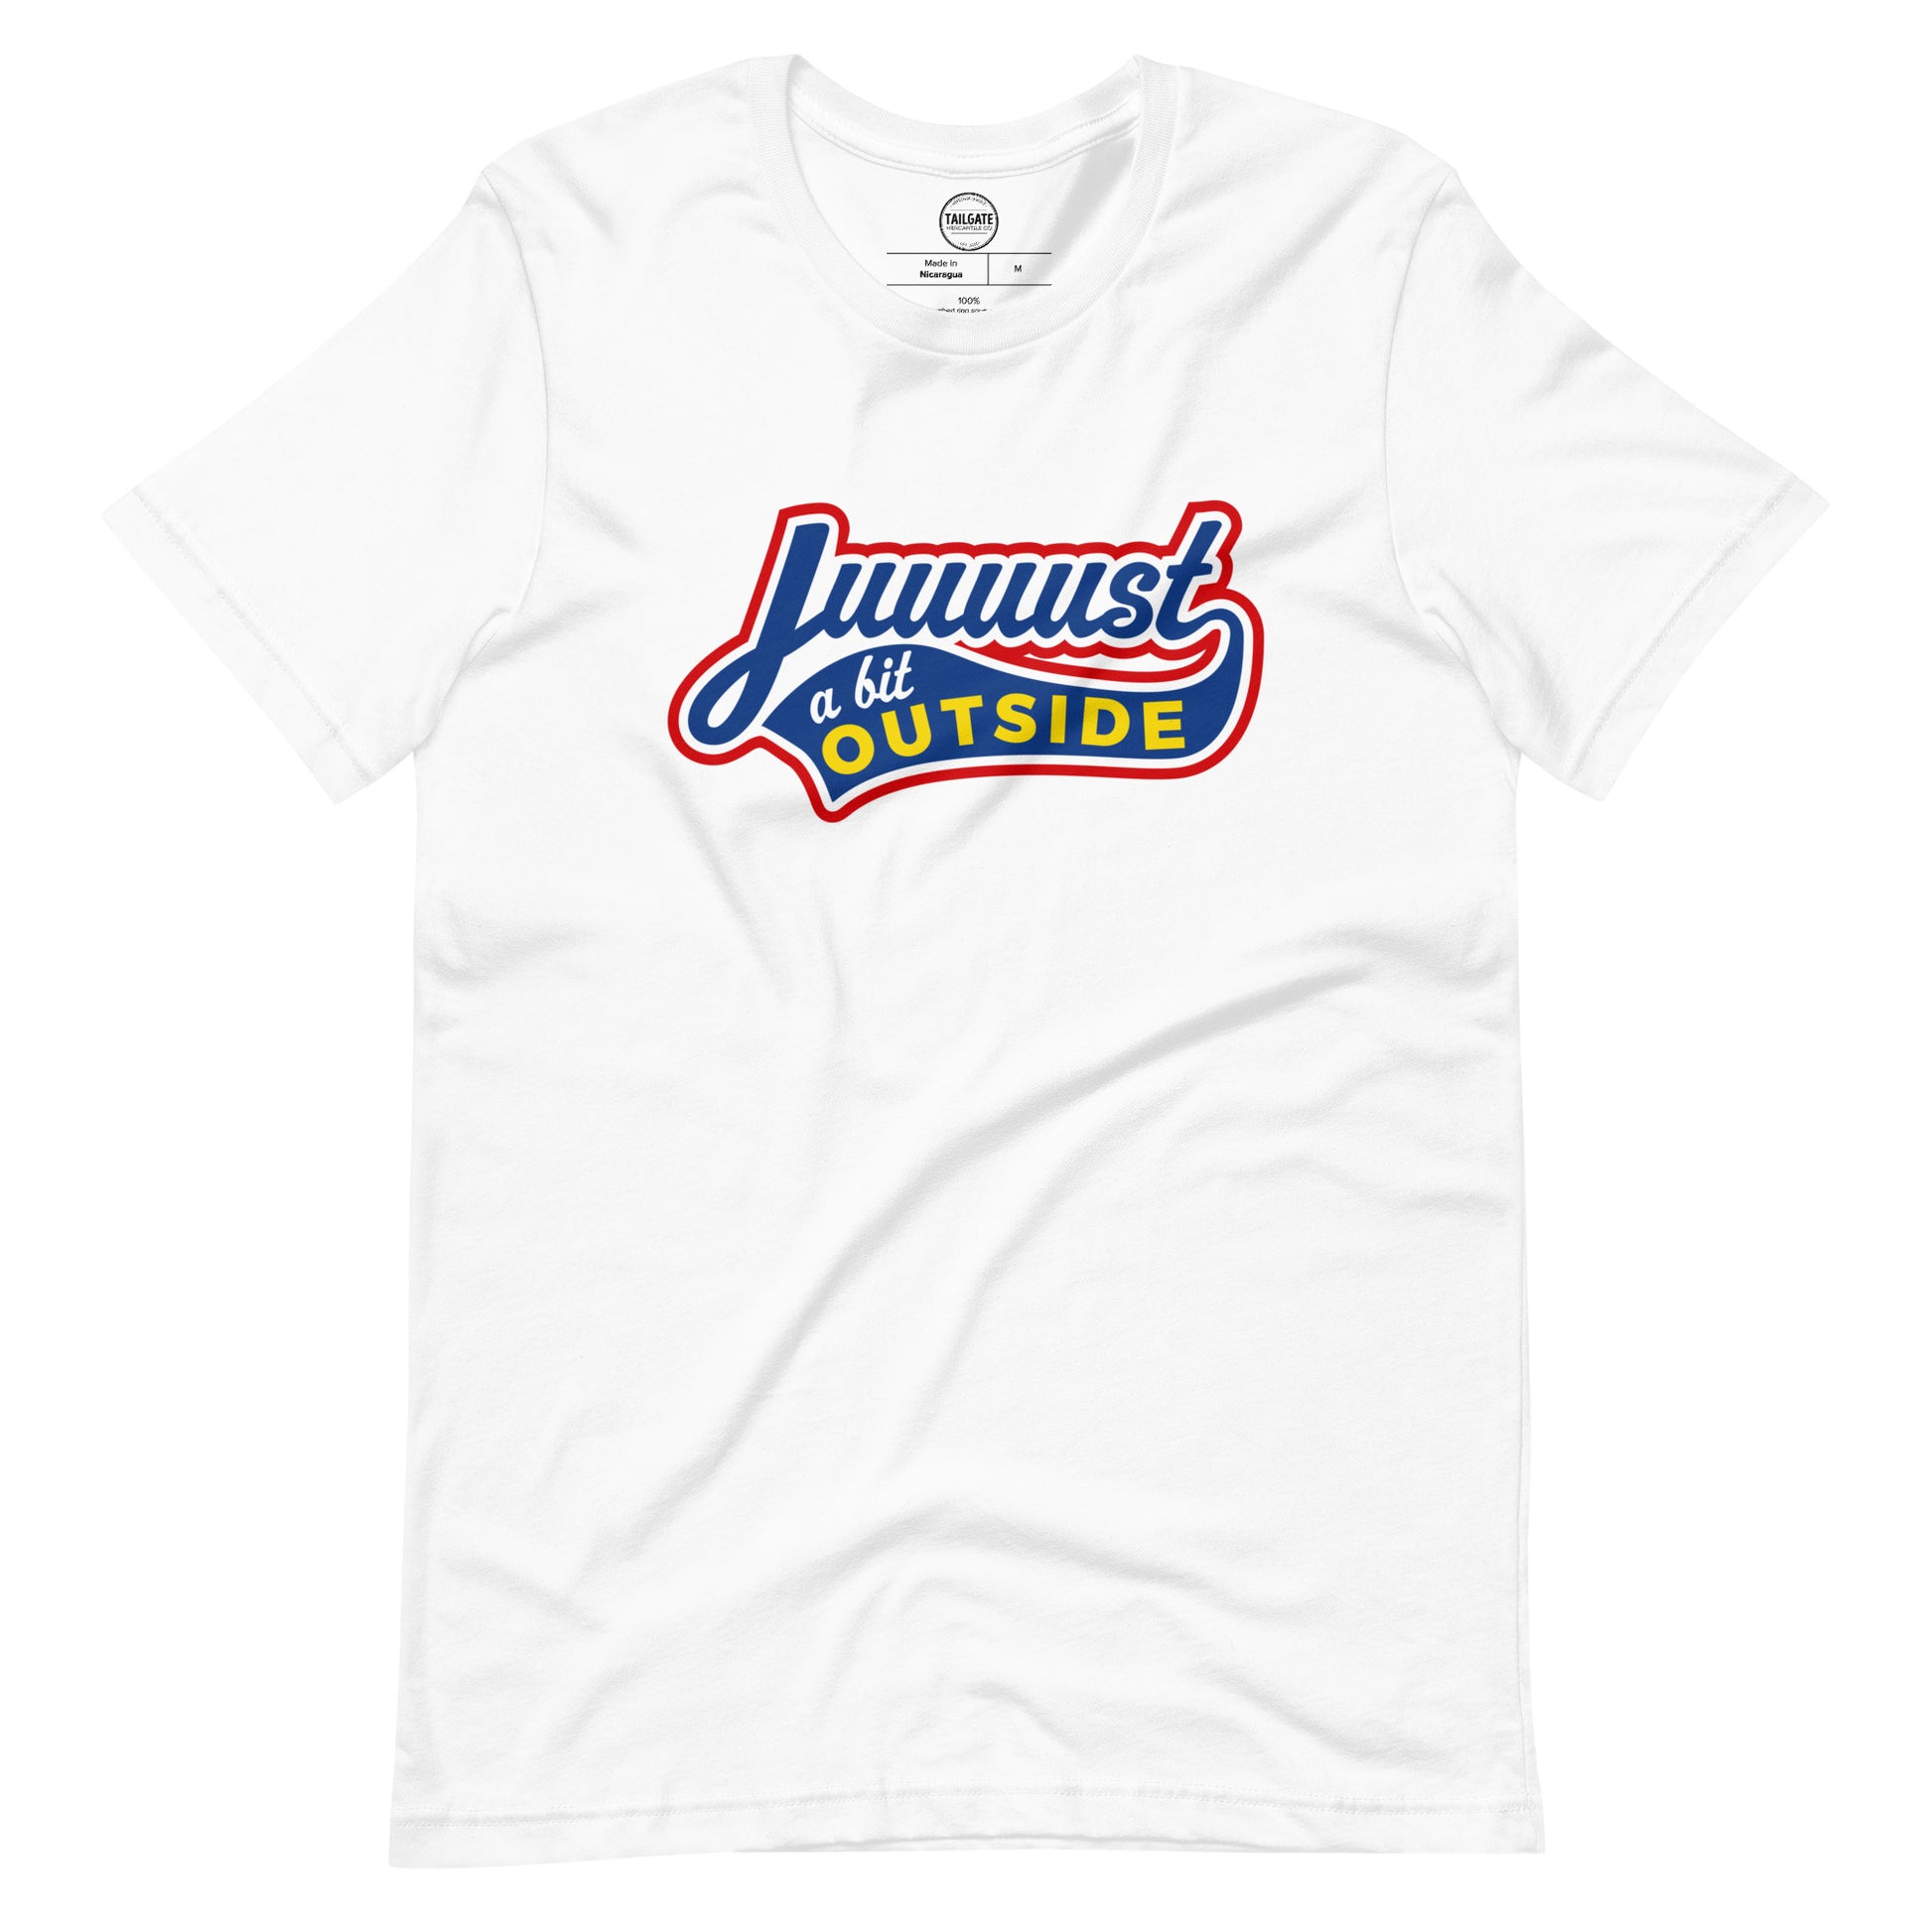 Image of white t-shirt with design of "Juuuust a bit Outside" in blue/red/yellow located on centre chest. Just a Bit Outside is an homage to the great baseball movie "Major League". This design is exclusive to Tailgate Mercantile and available only online.